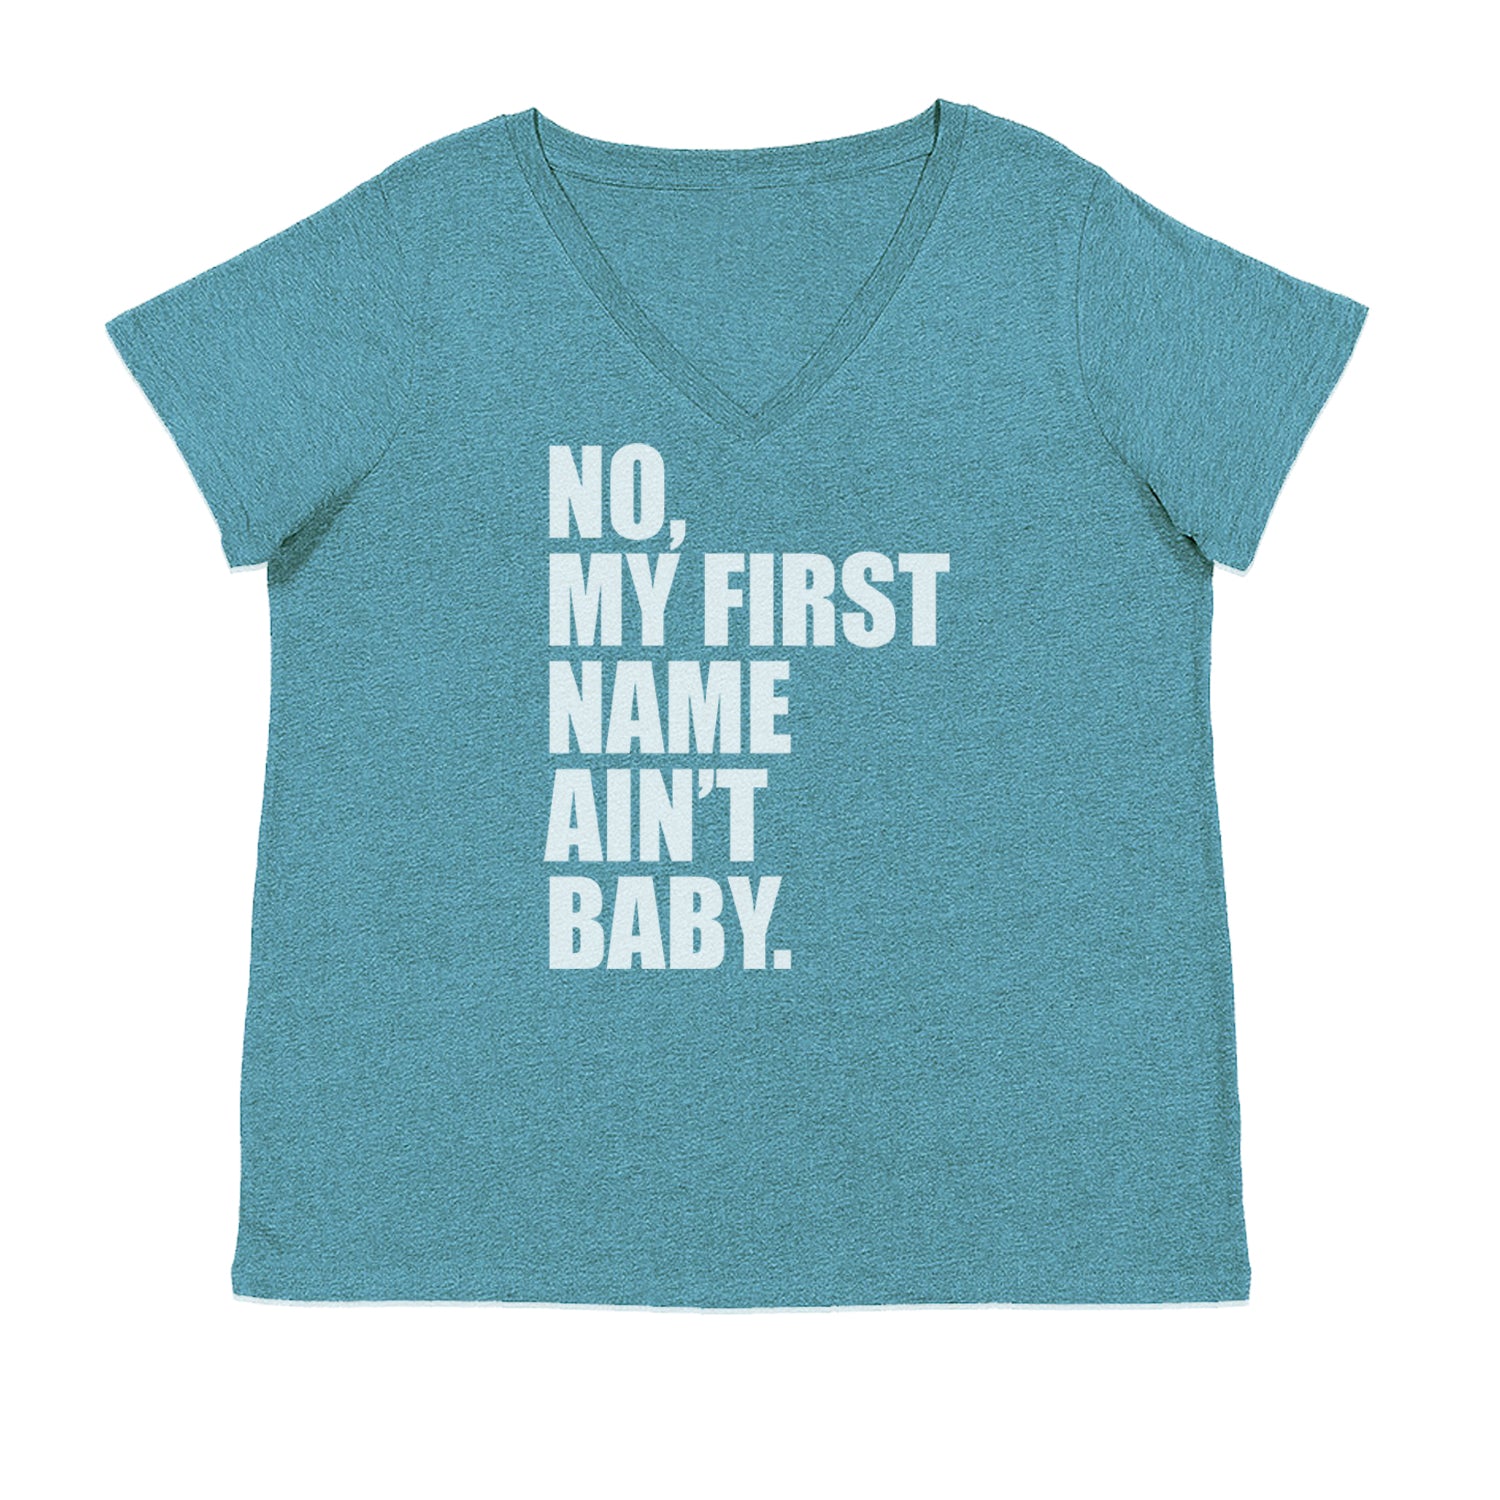 No My First Name Ain't Baby Together Again Ladies V-Neck T-shirt Surf